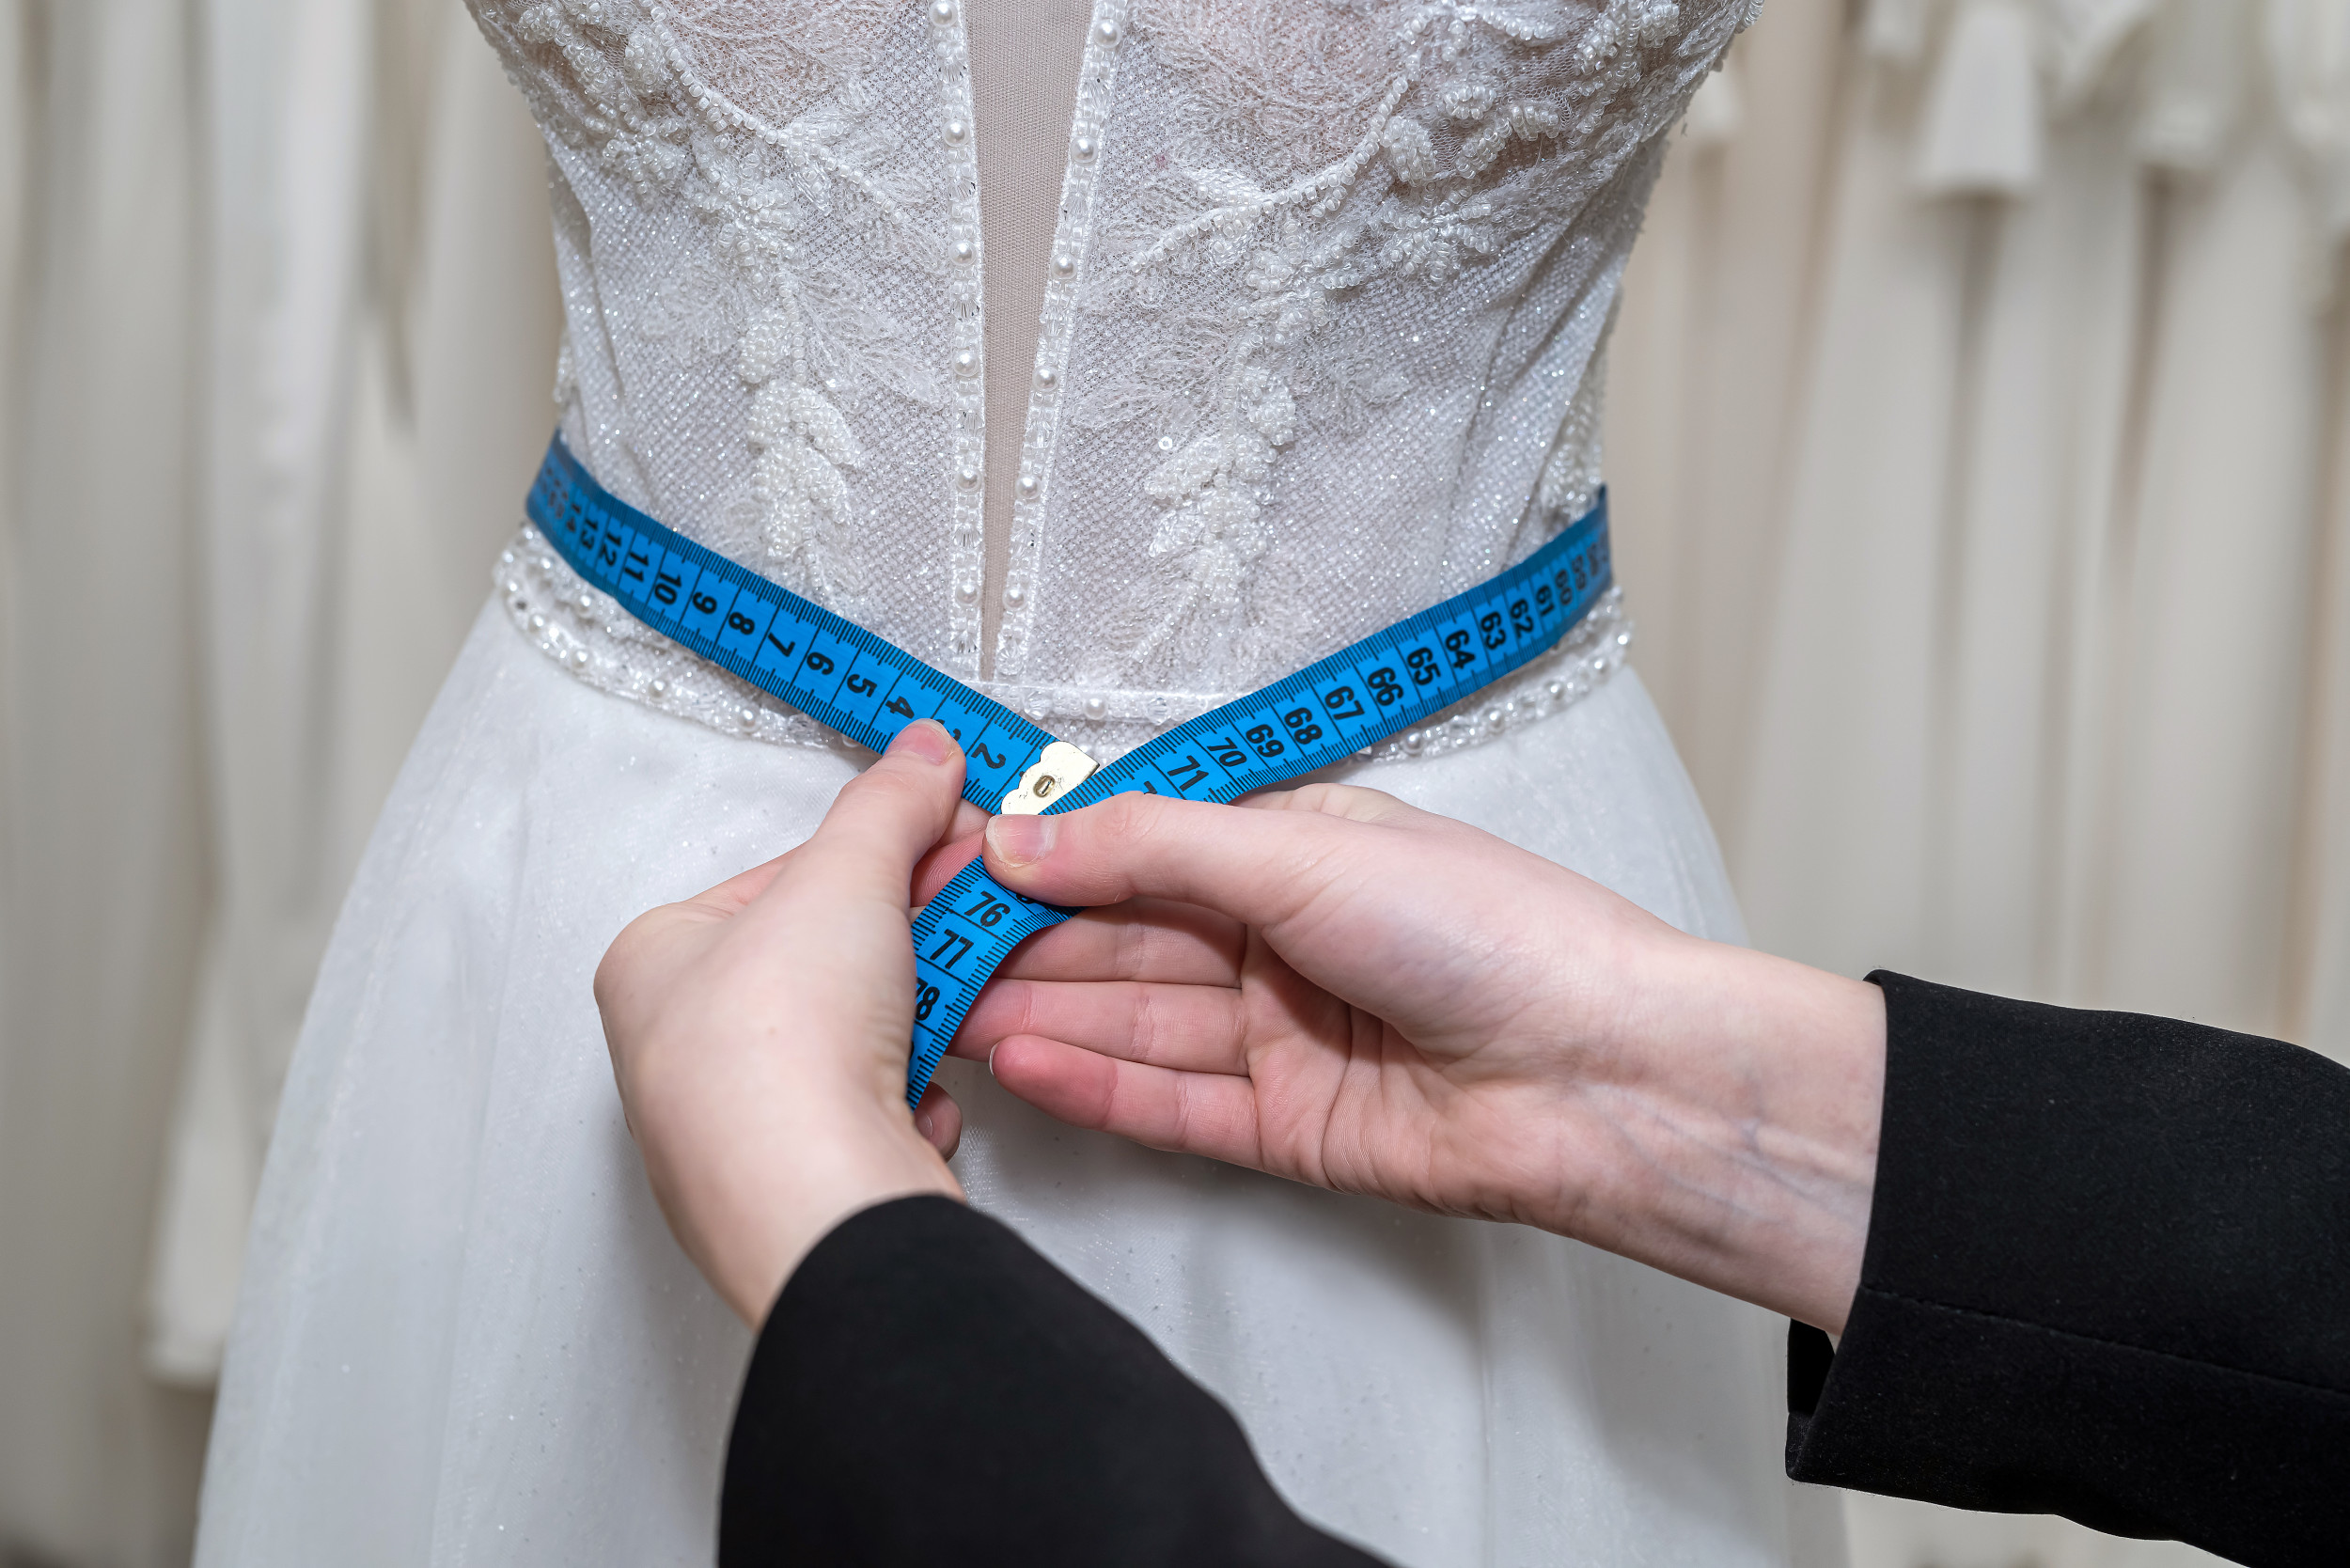 Bridal Store Forcing Woman to Sign $489 Waiver or Lose Weight Backed